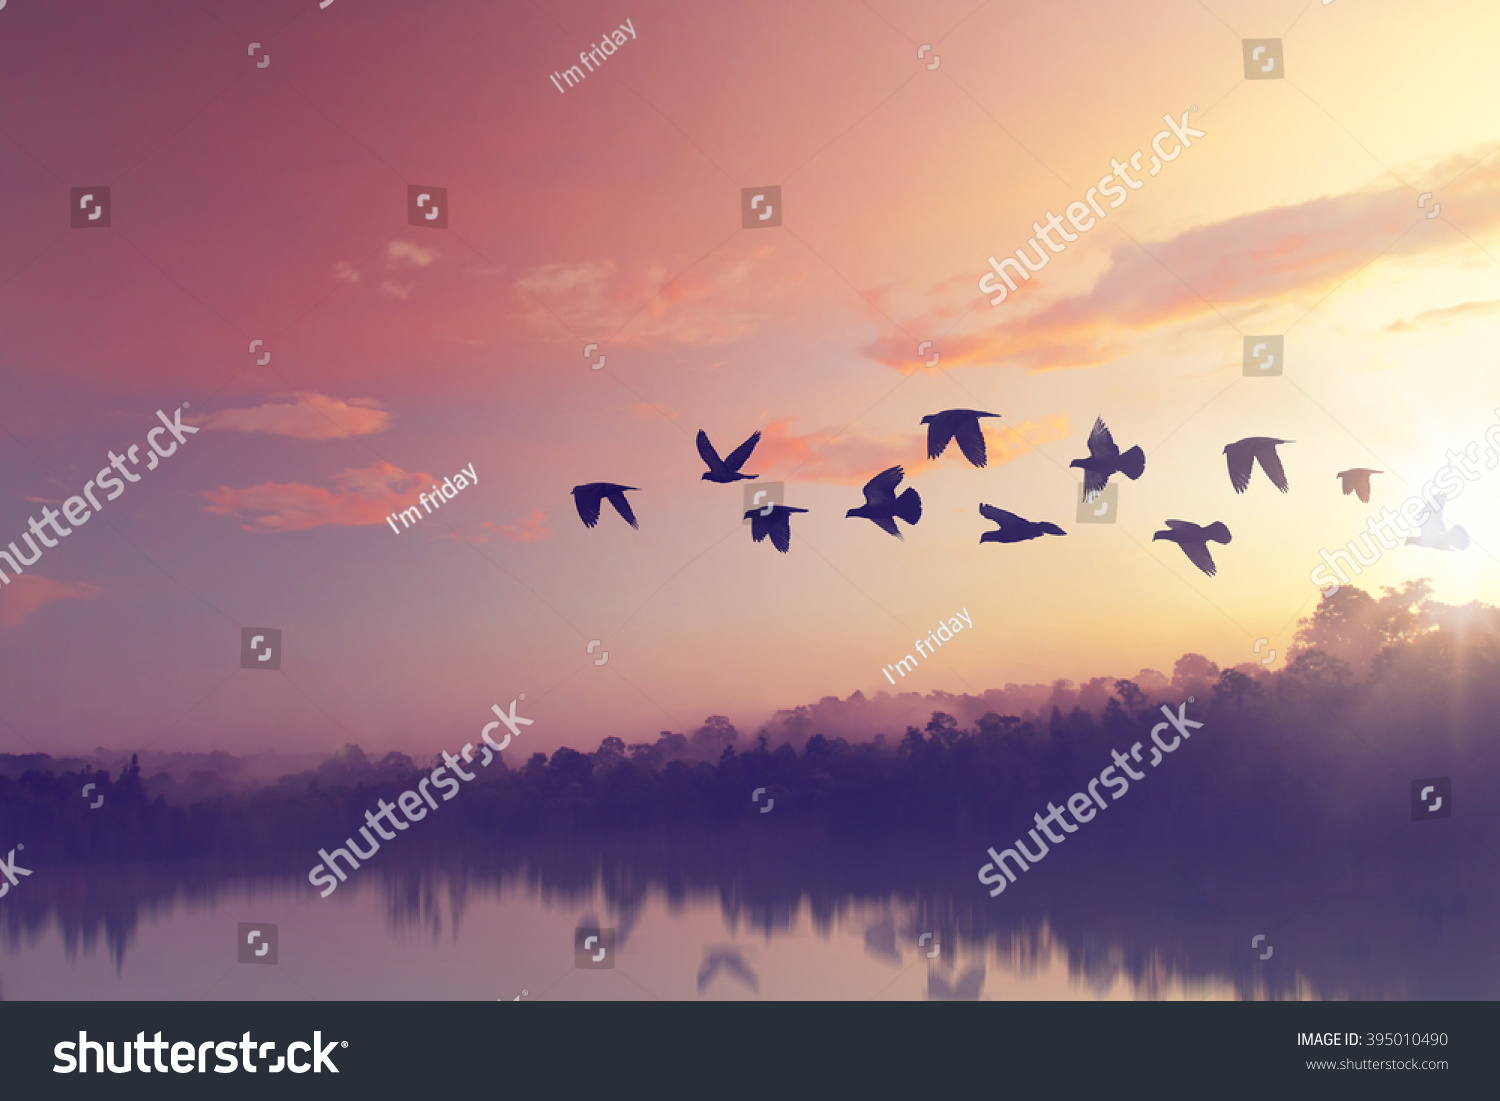 Sun shining and birds silhouettes flying sunset sky  go home #395010490